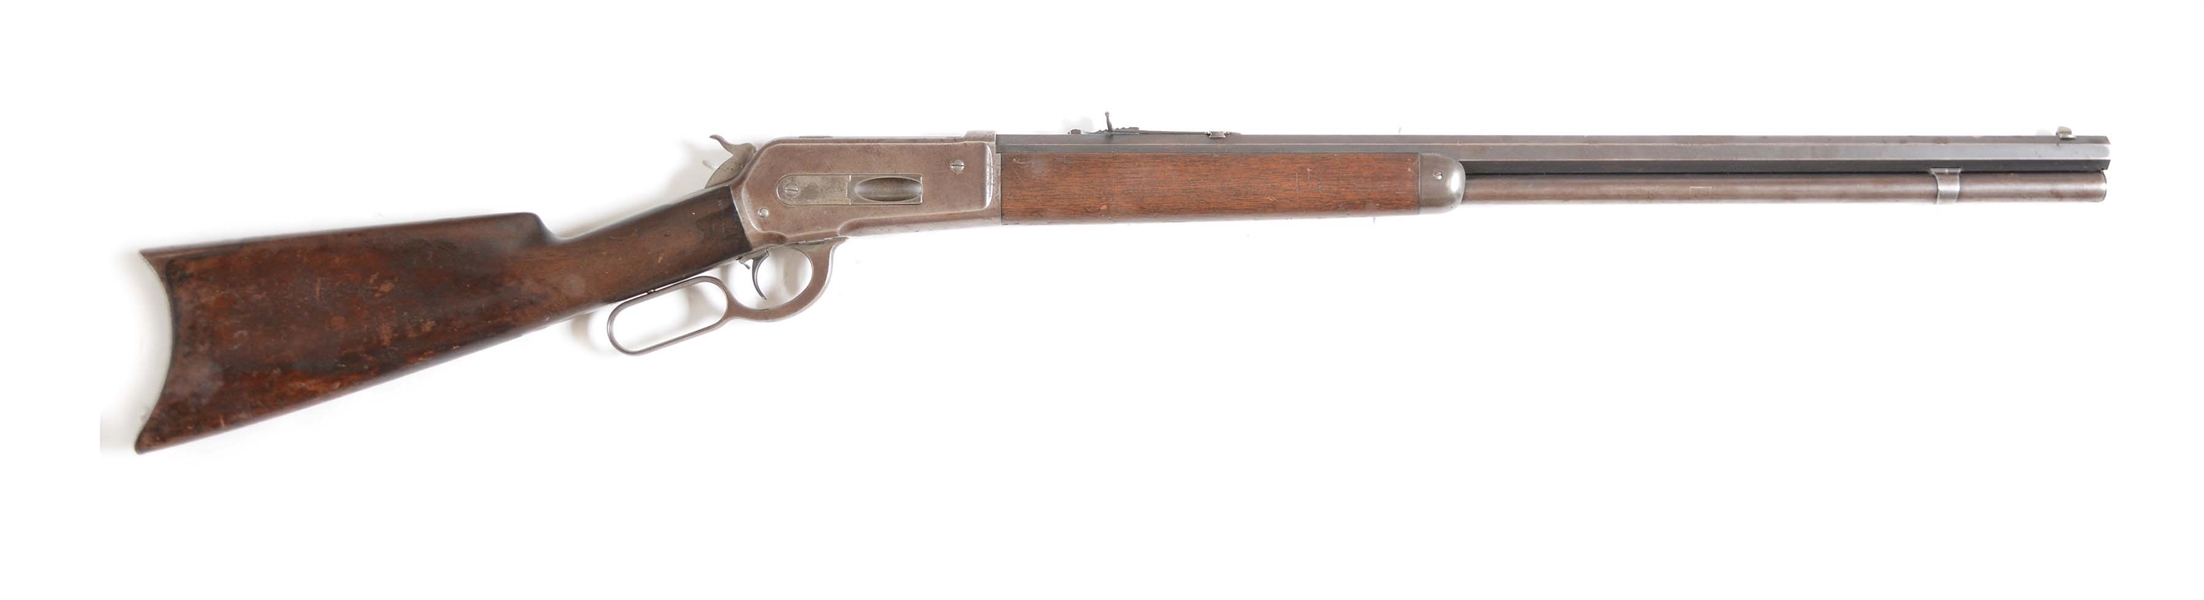 (A) WINCHESTER 1886 LEVER ACTION RIFLE (1889).